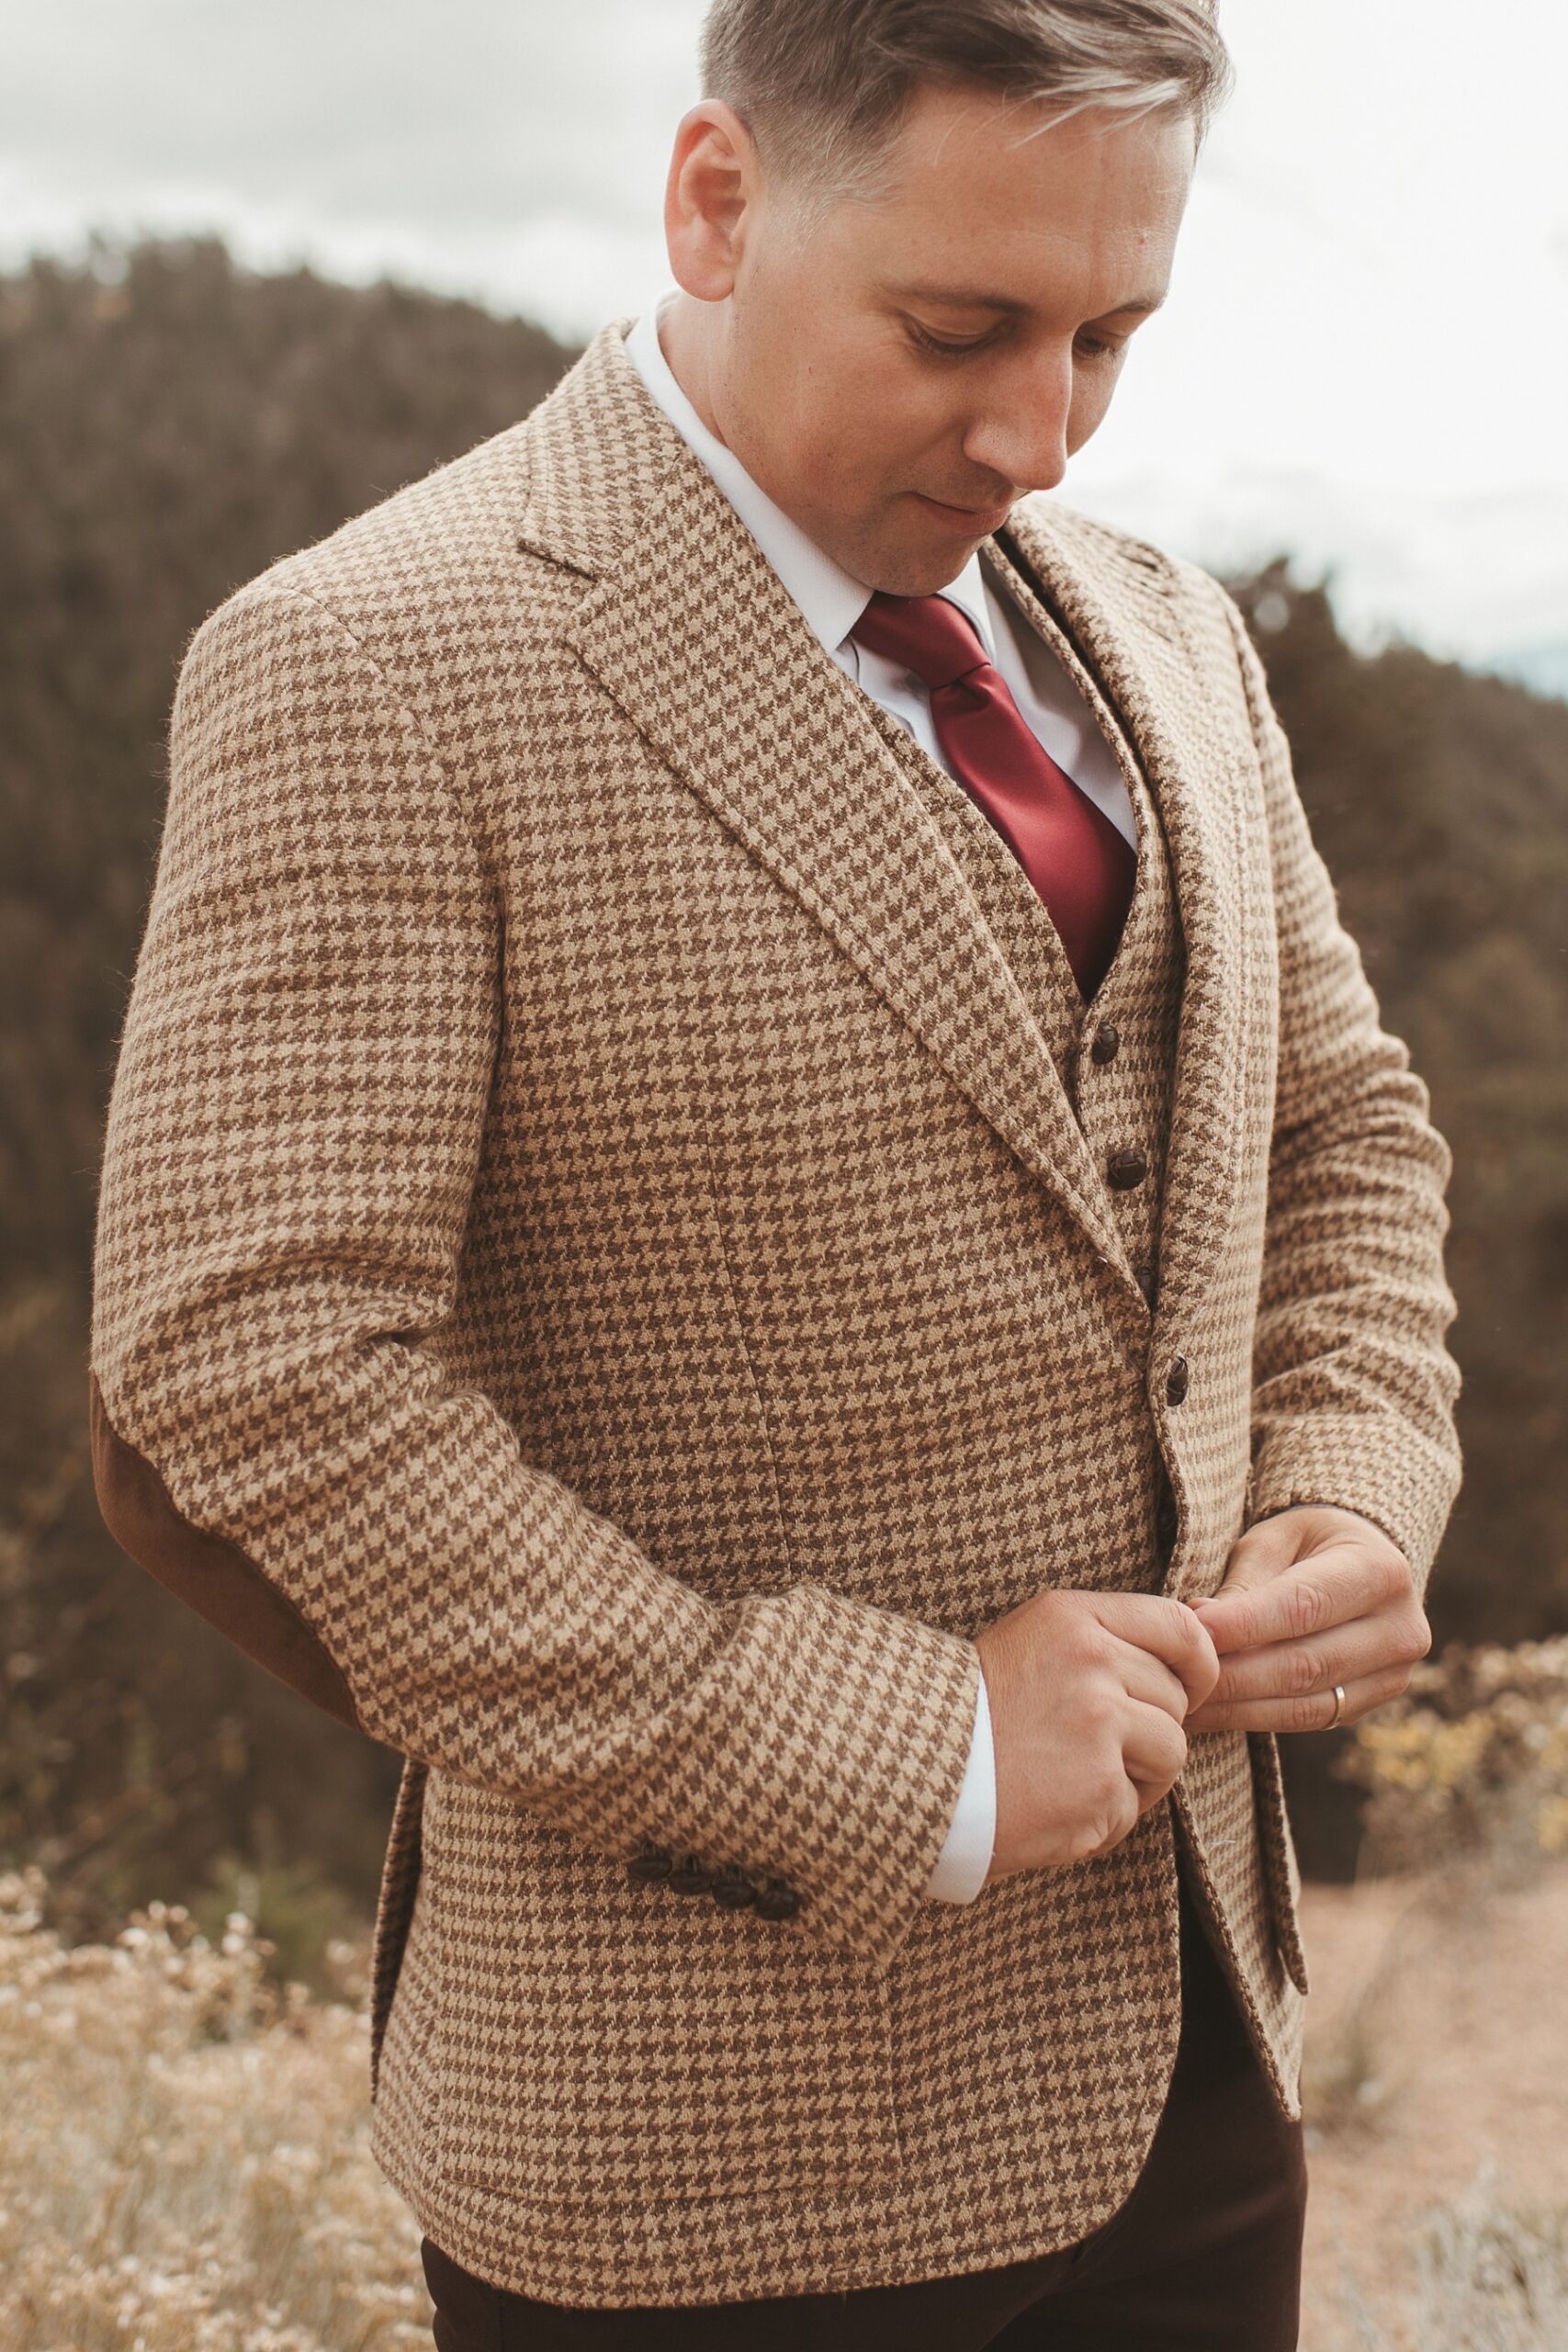 Groom buttoning tan houndstooth jacket